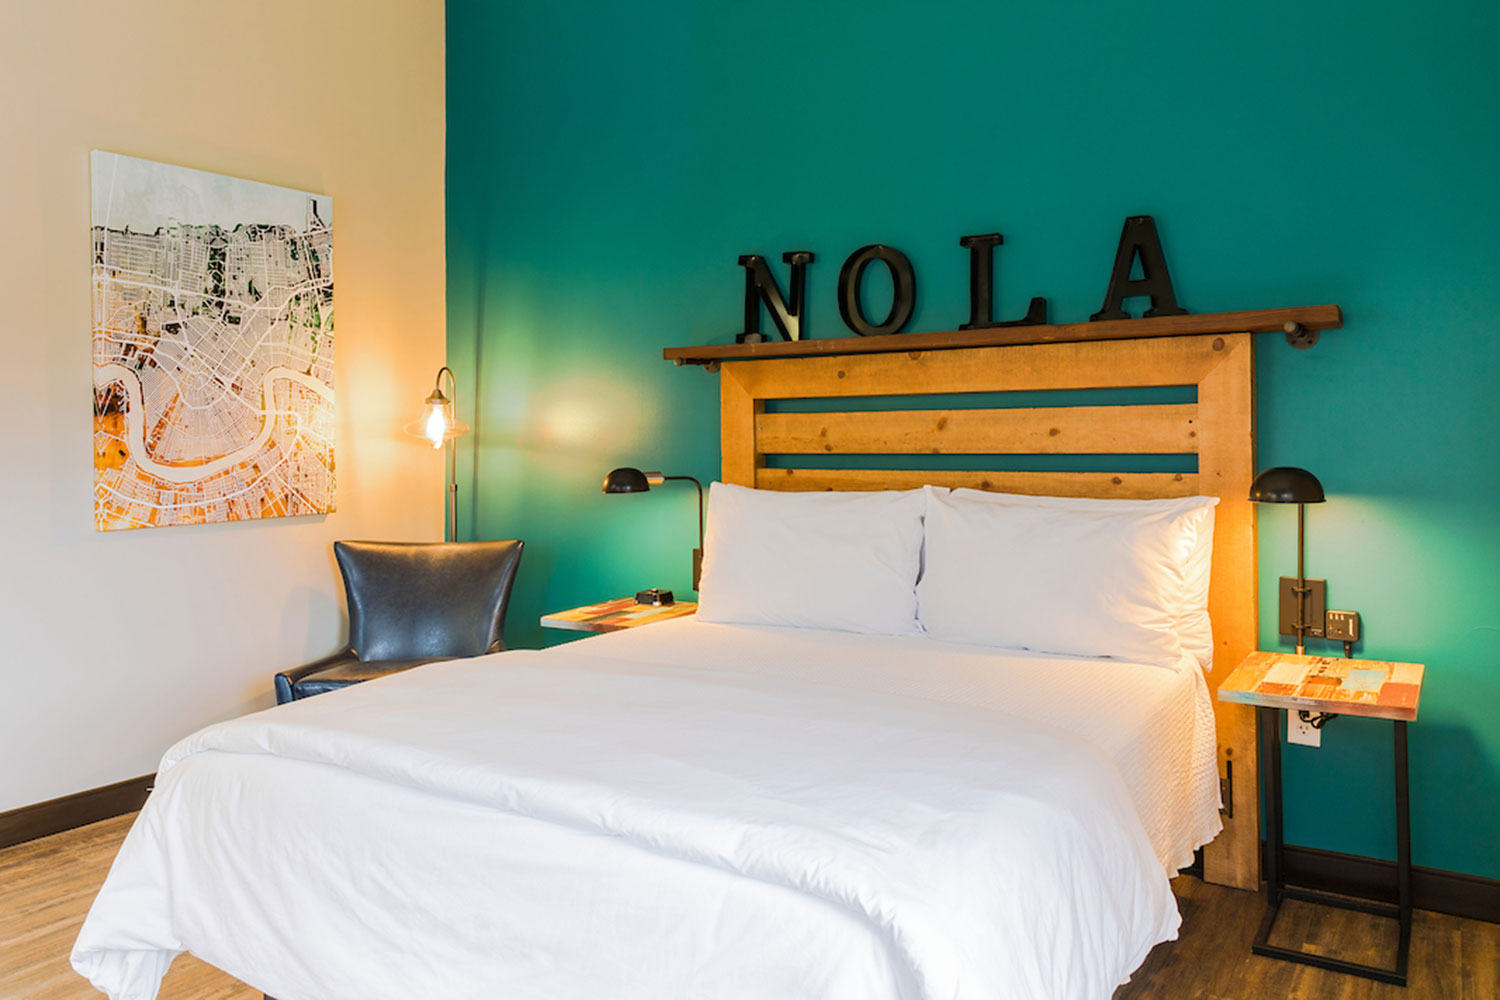 A queen-sized bed with crisp white linens and a wooden headboard against a turquoise colored wall at HI New Orleans hostel